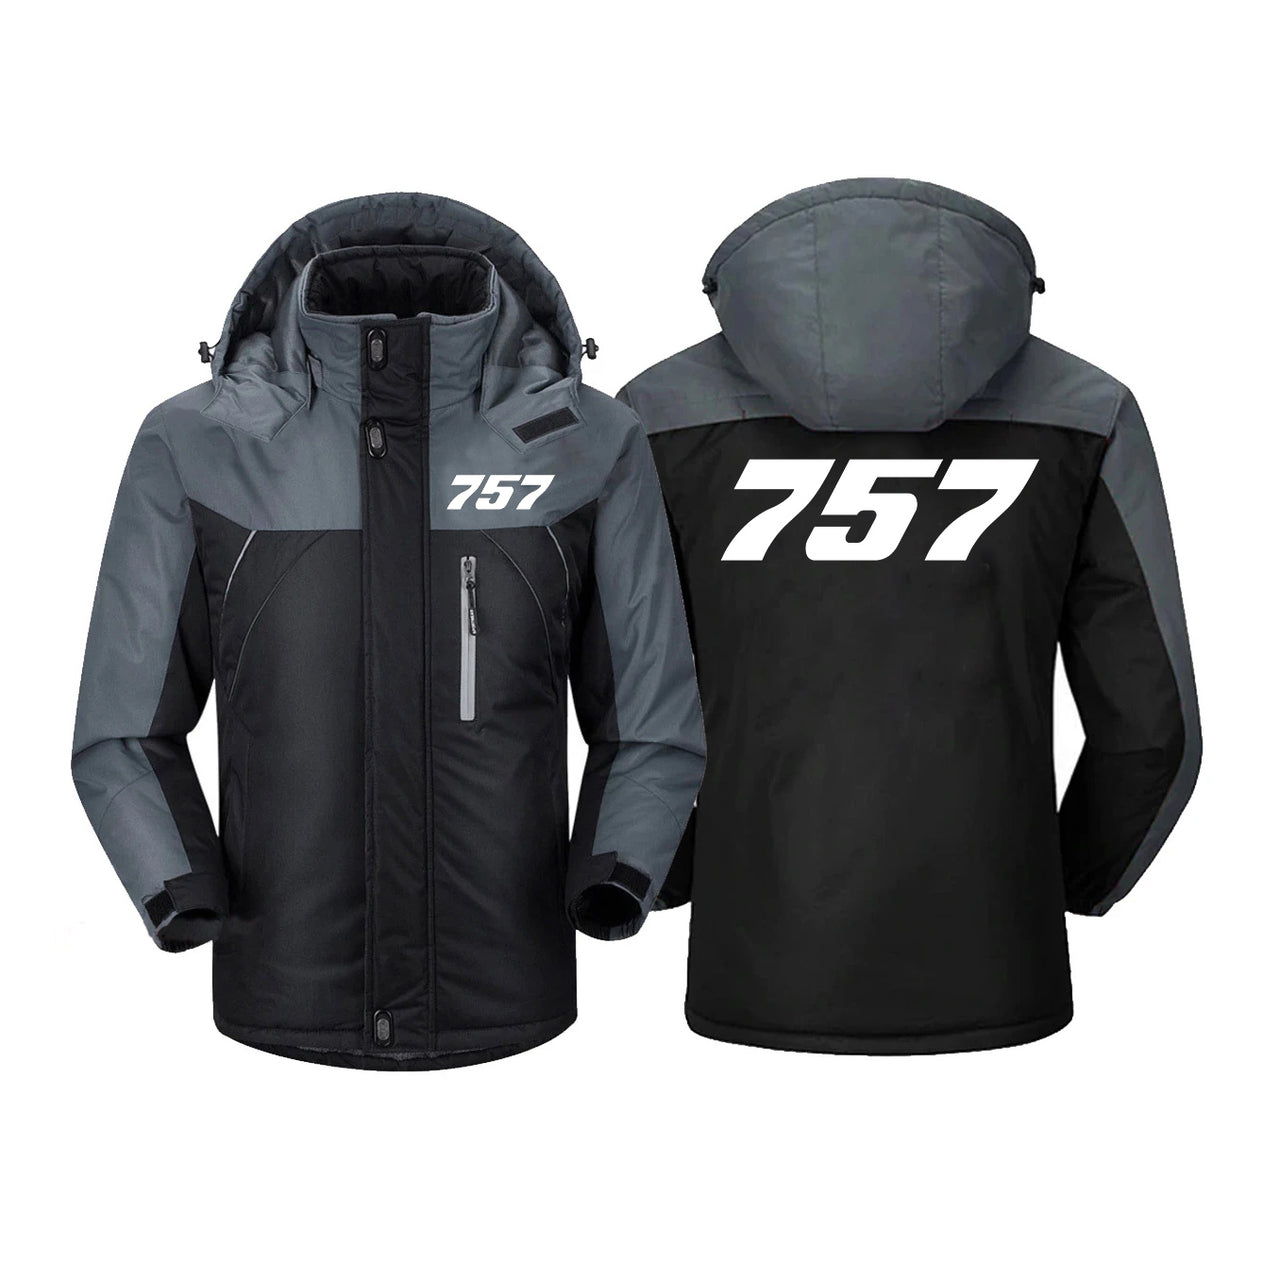 757 Flat Text Designed Thick Winter Jackets